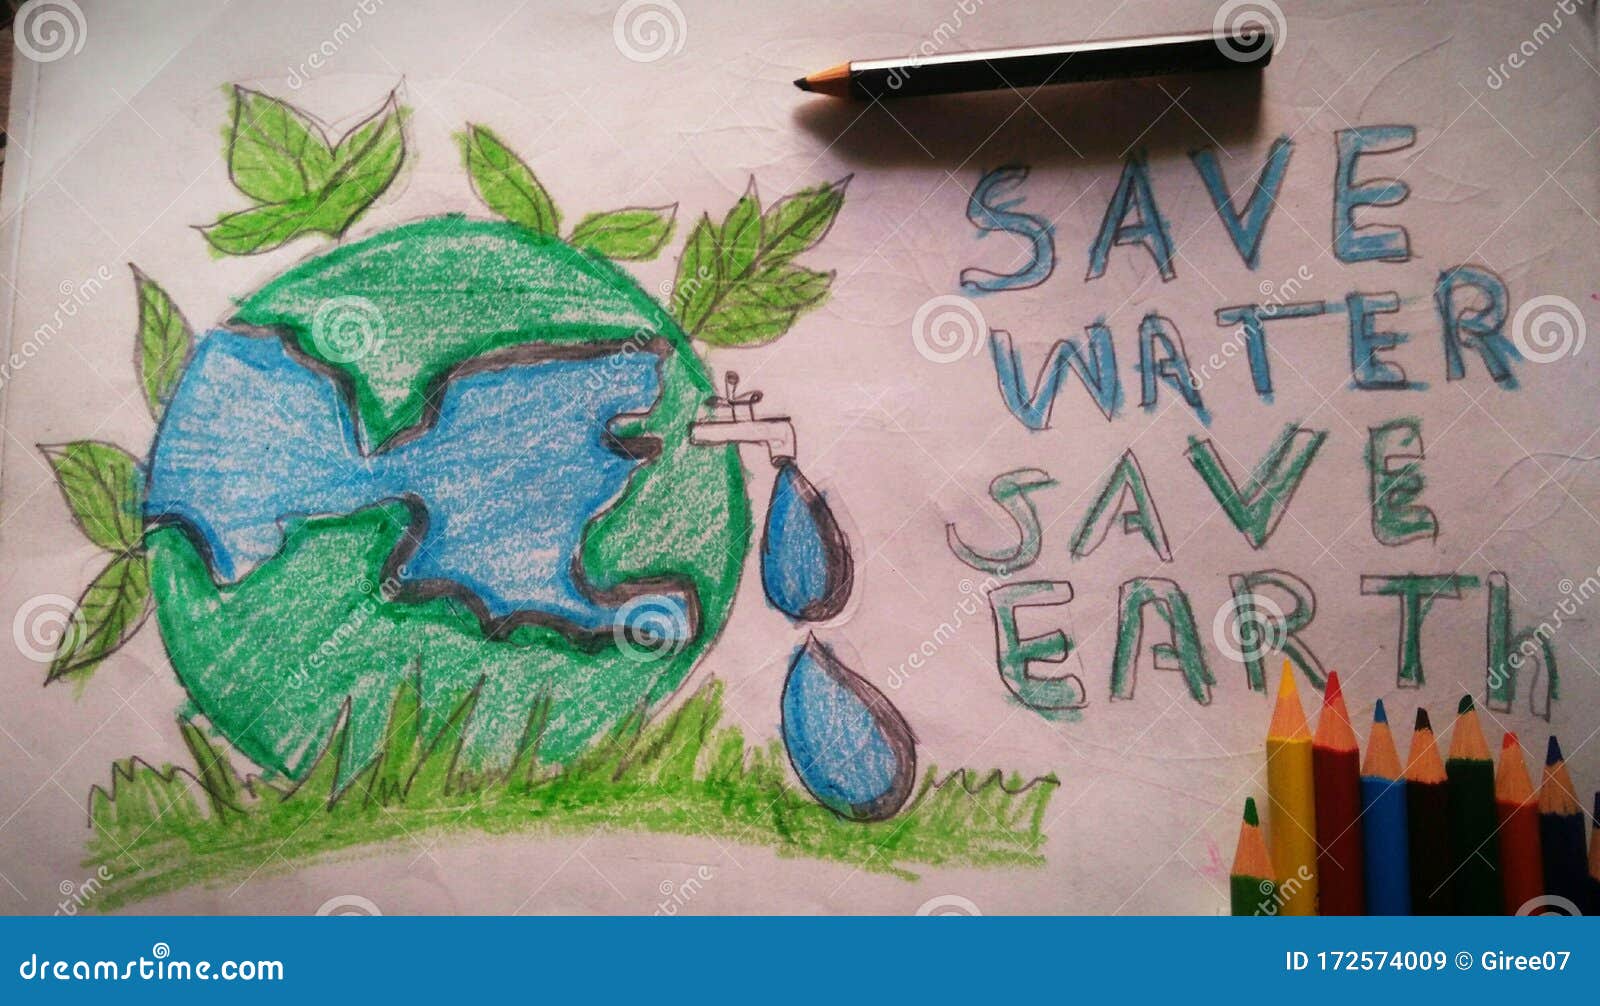 SAVE THE FOREST DRAWING||SAVE THE TREE ||SAVE EARTH PAINTING - YouTube